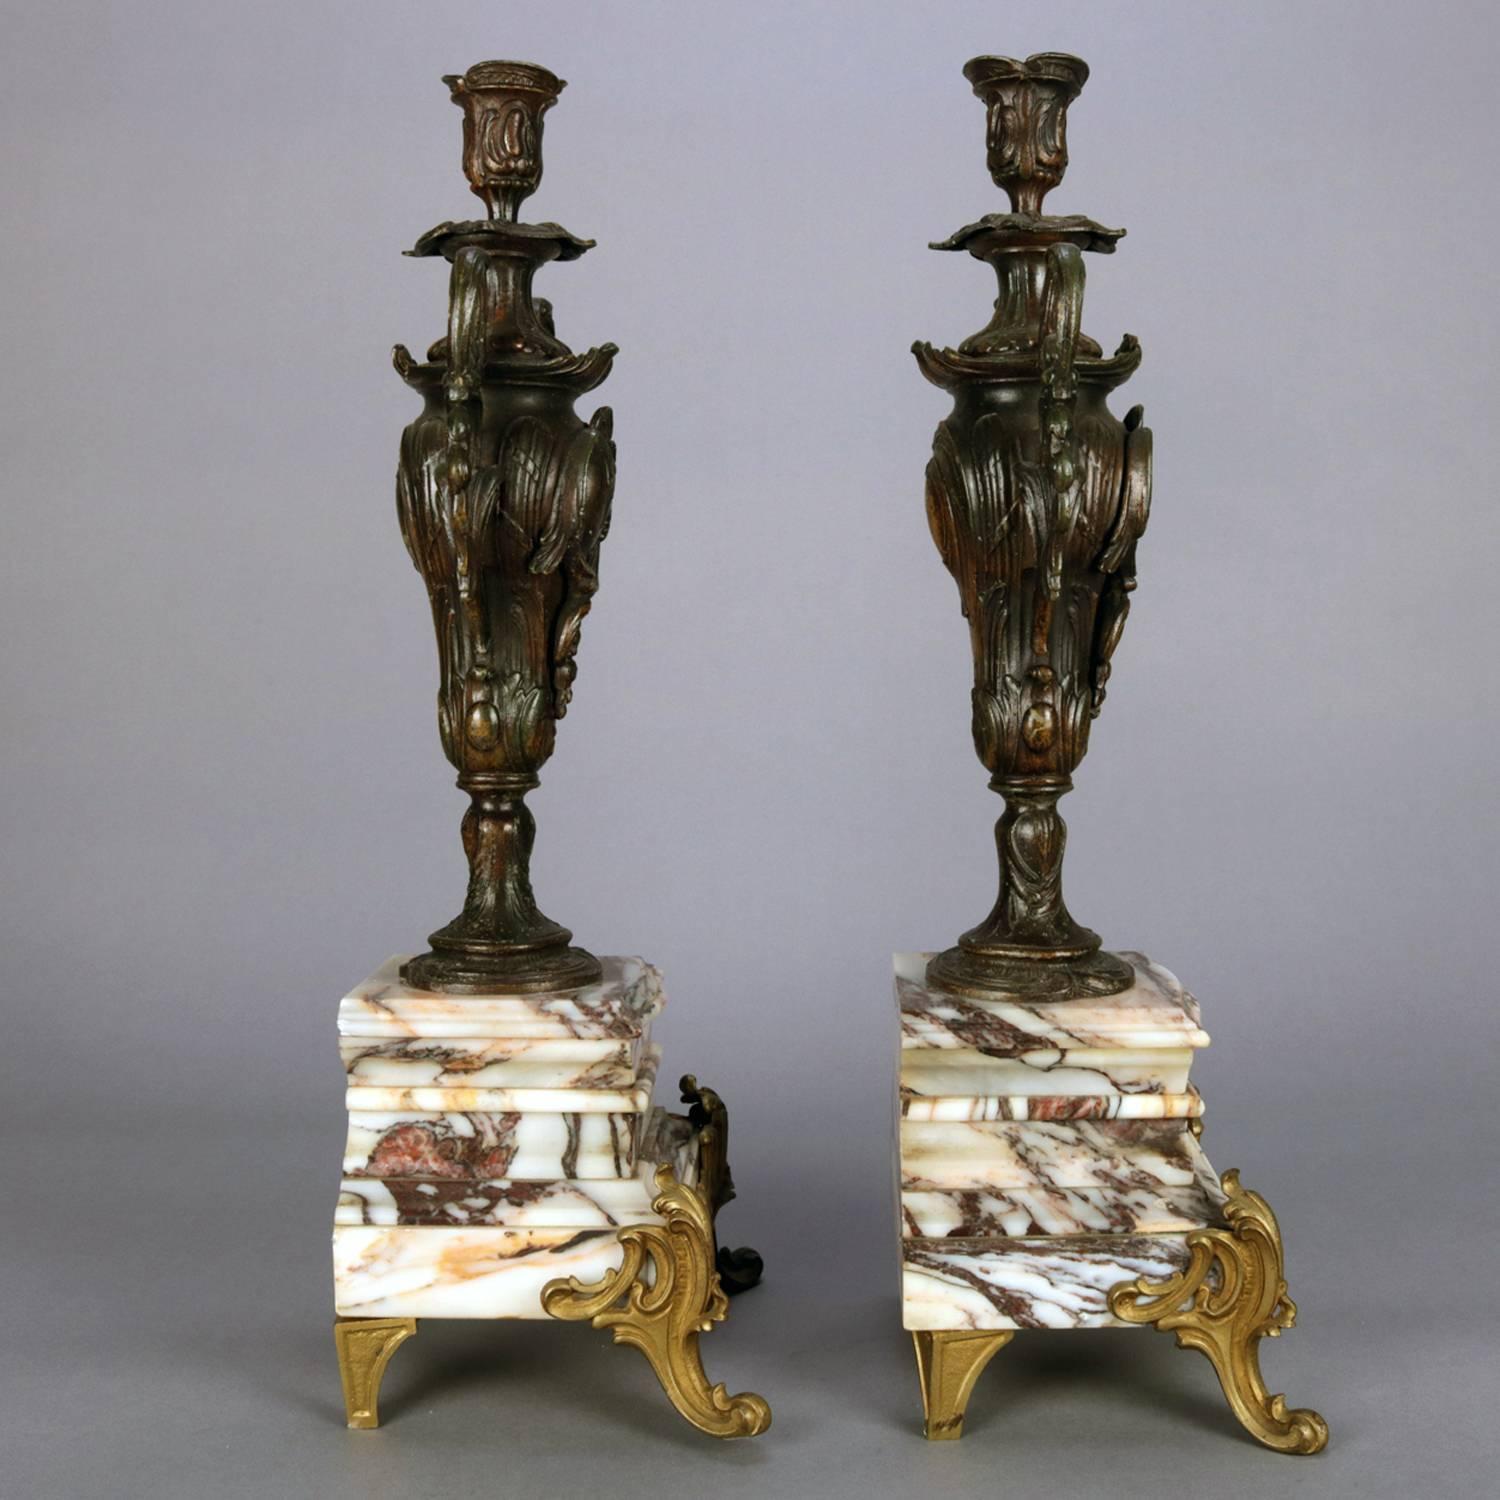 Classical Greek Pair of Classical Parcel-Gilt and Bronzed Urn Form Candlesticks on Marble Base